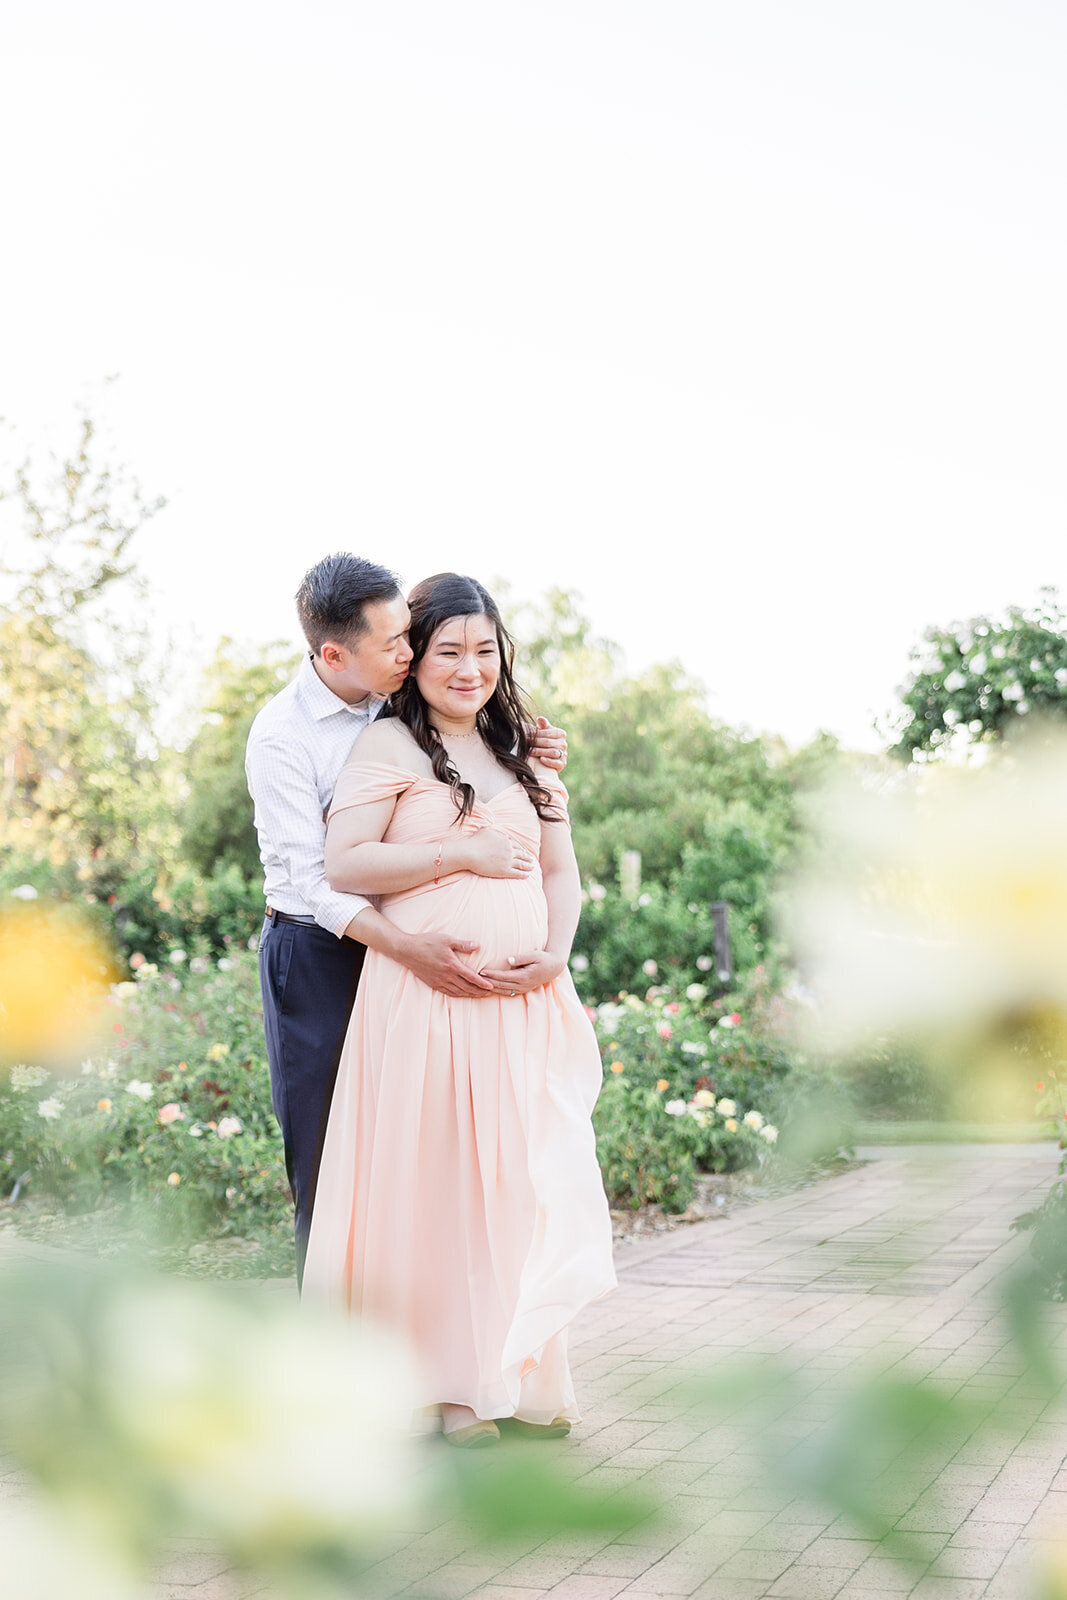 Heather Farms Maternity Session- Alyssa Wendt Photography_0008_websize